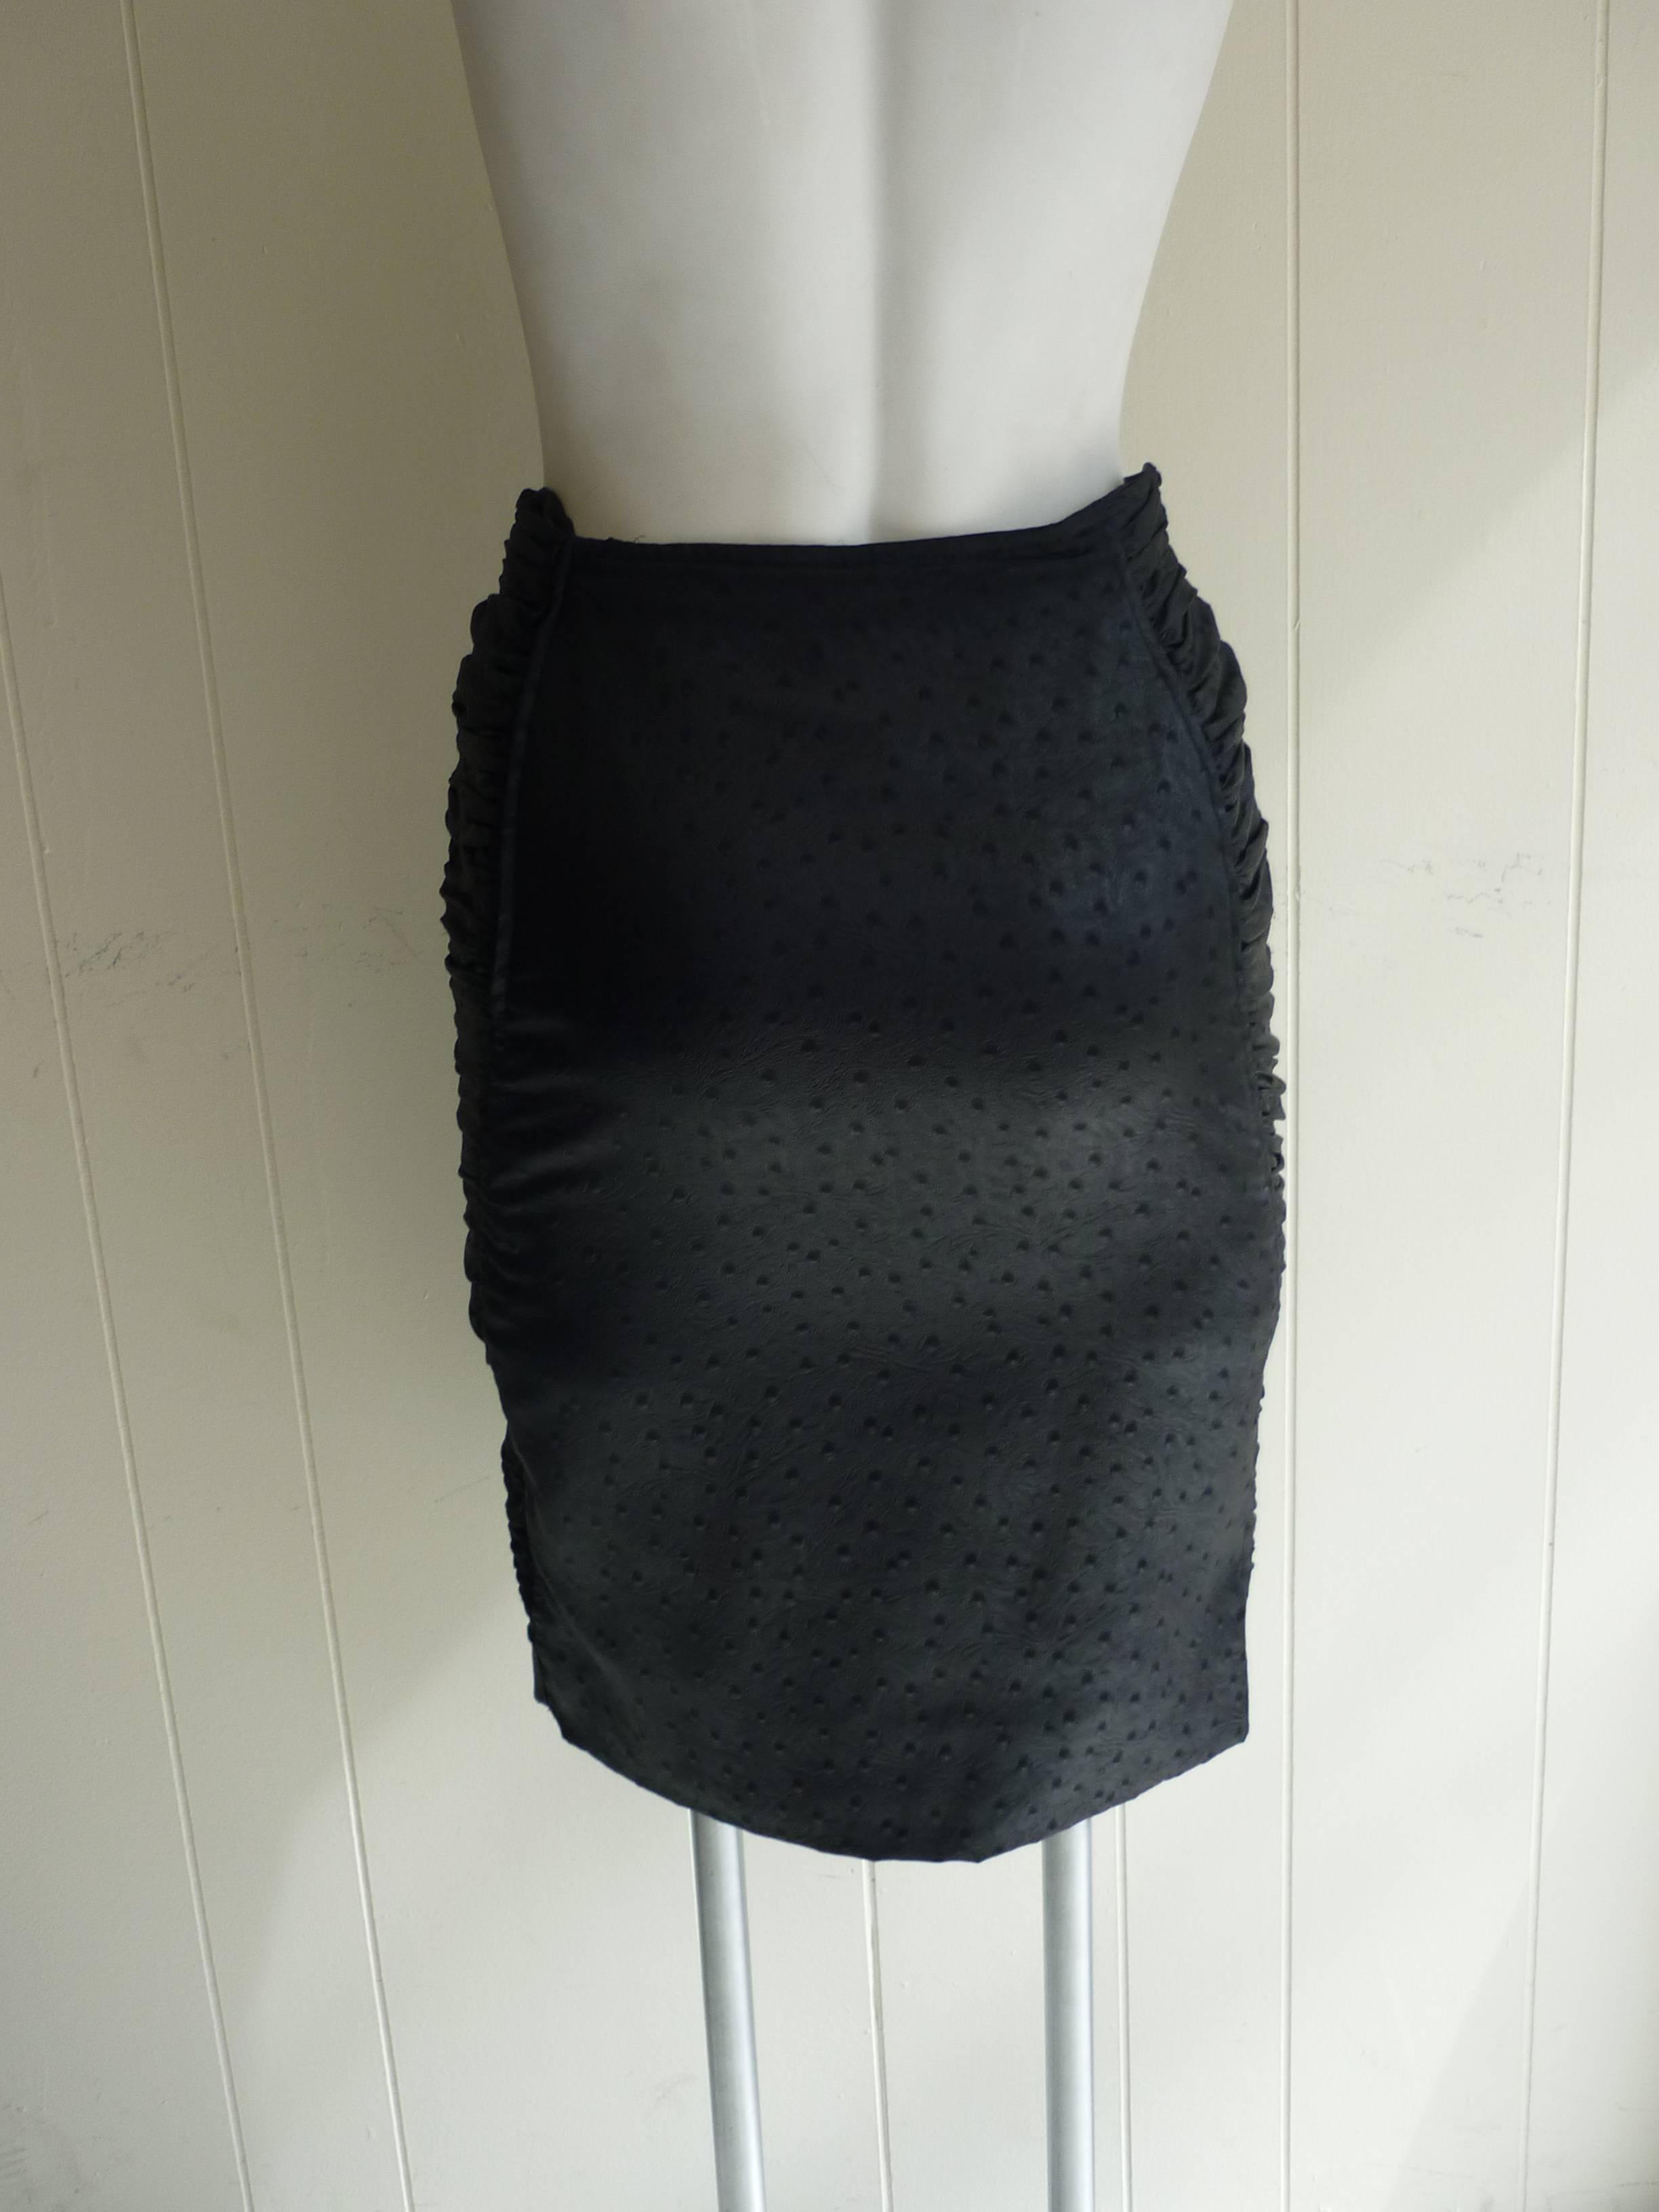 At first glance it looks like leather, but this is a cloth ostrich print pencil skirt. The sides are ruched to a point at the hem and closure is by a zip which is just off the side.